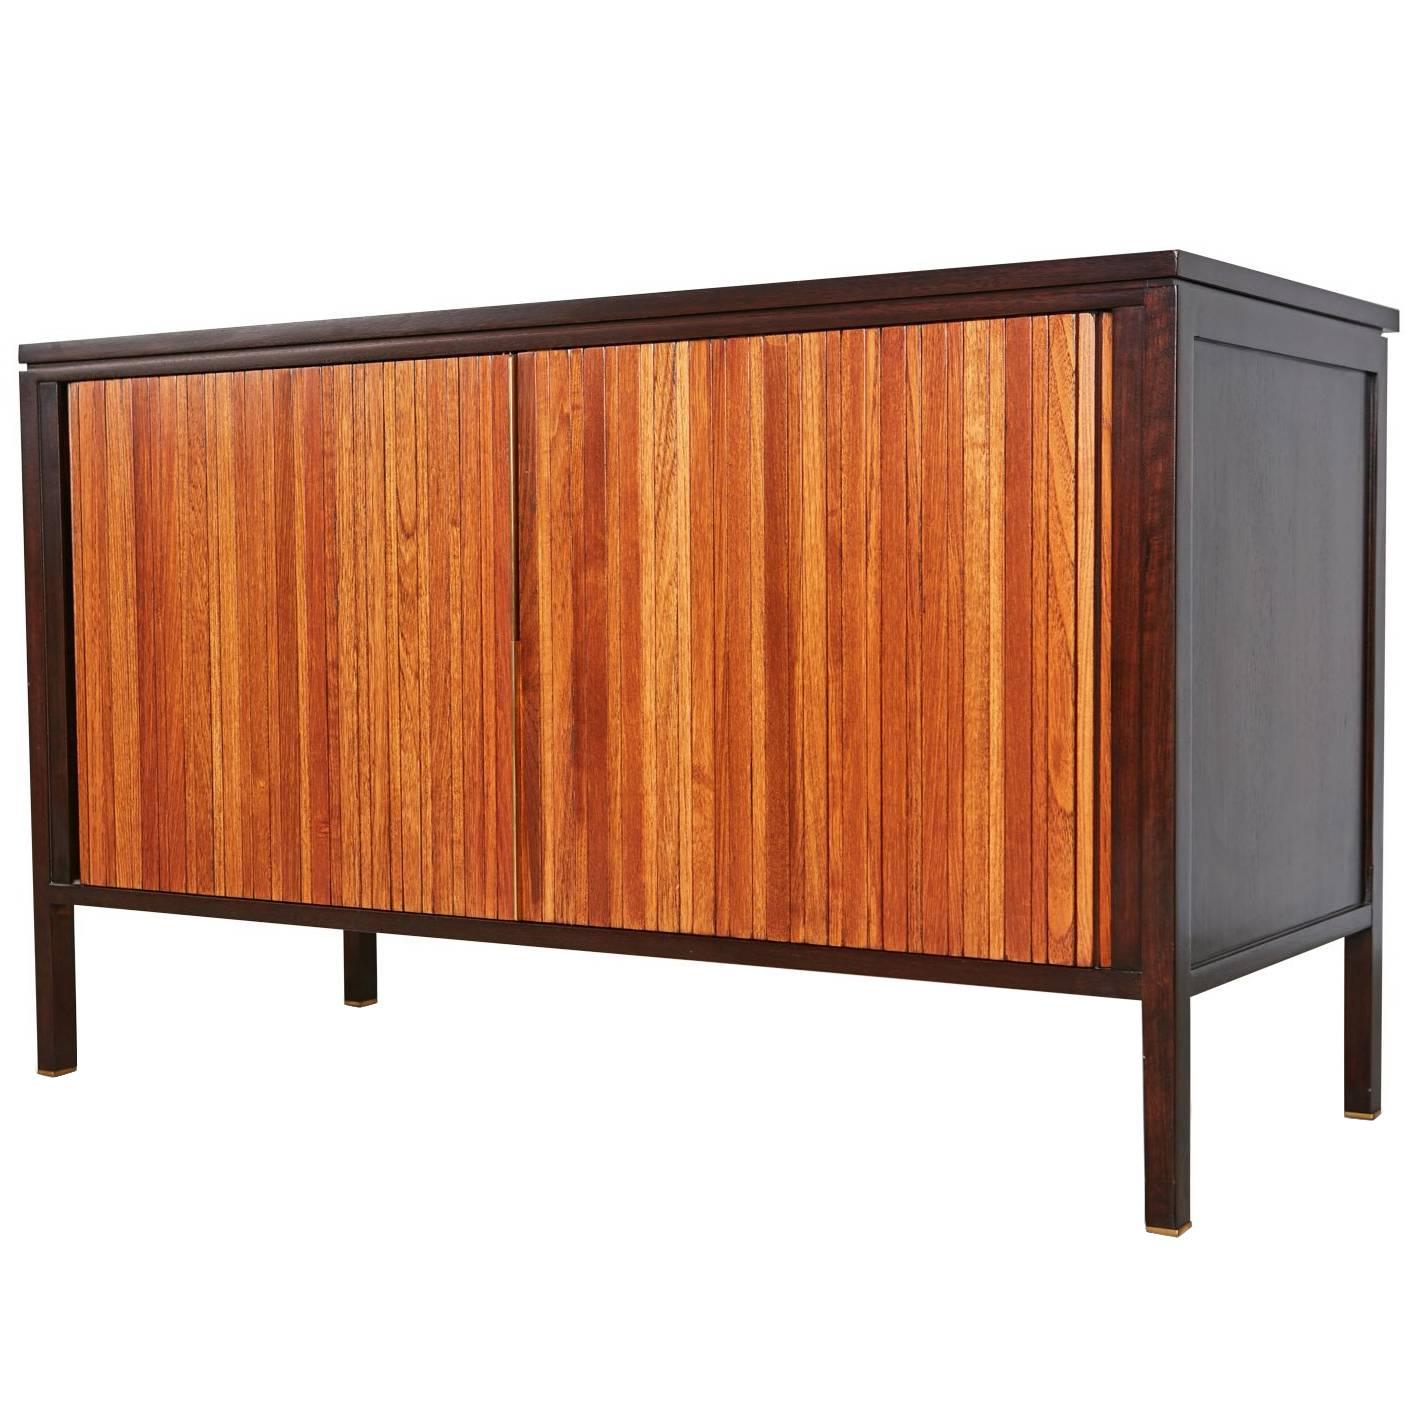 Edward Wormley for Dunbar Tambour Credenza with Pop-Up Table, circa 1960